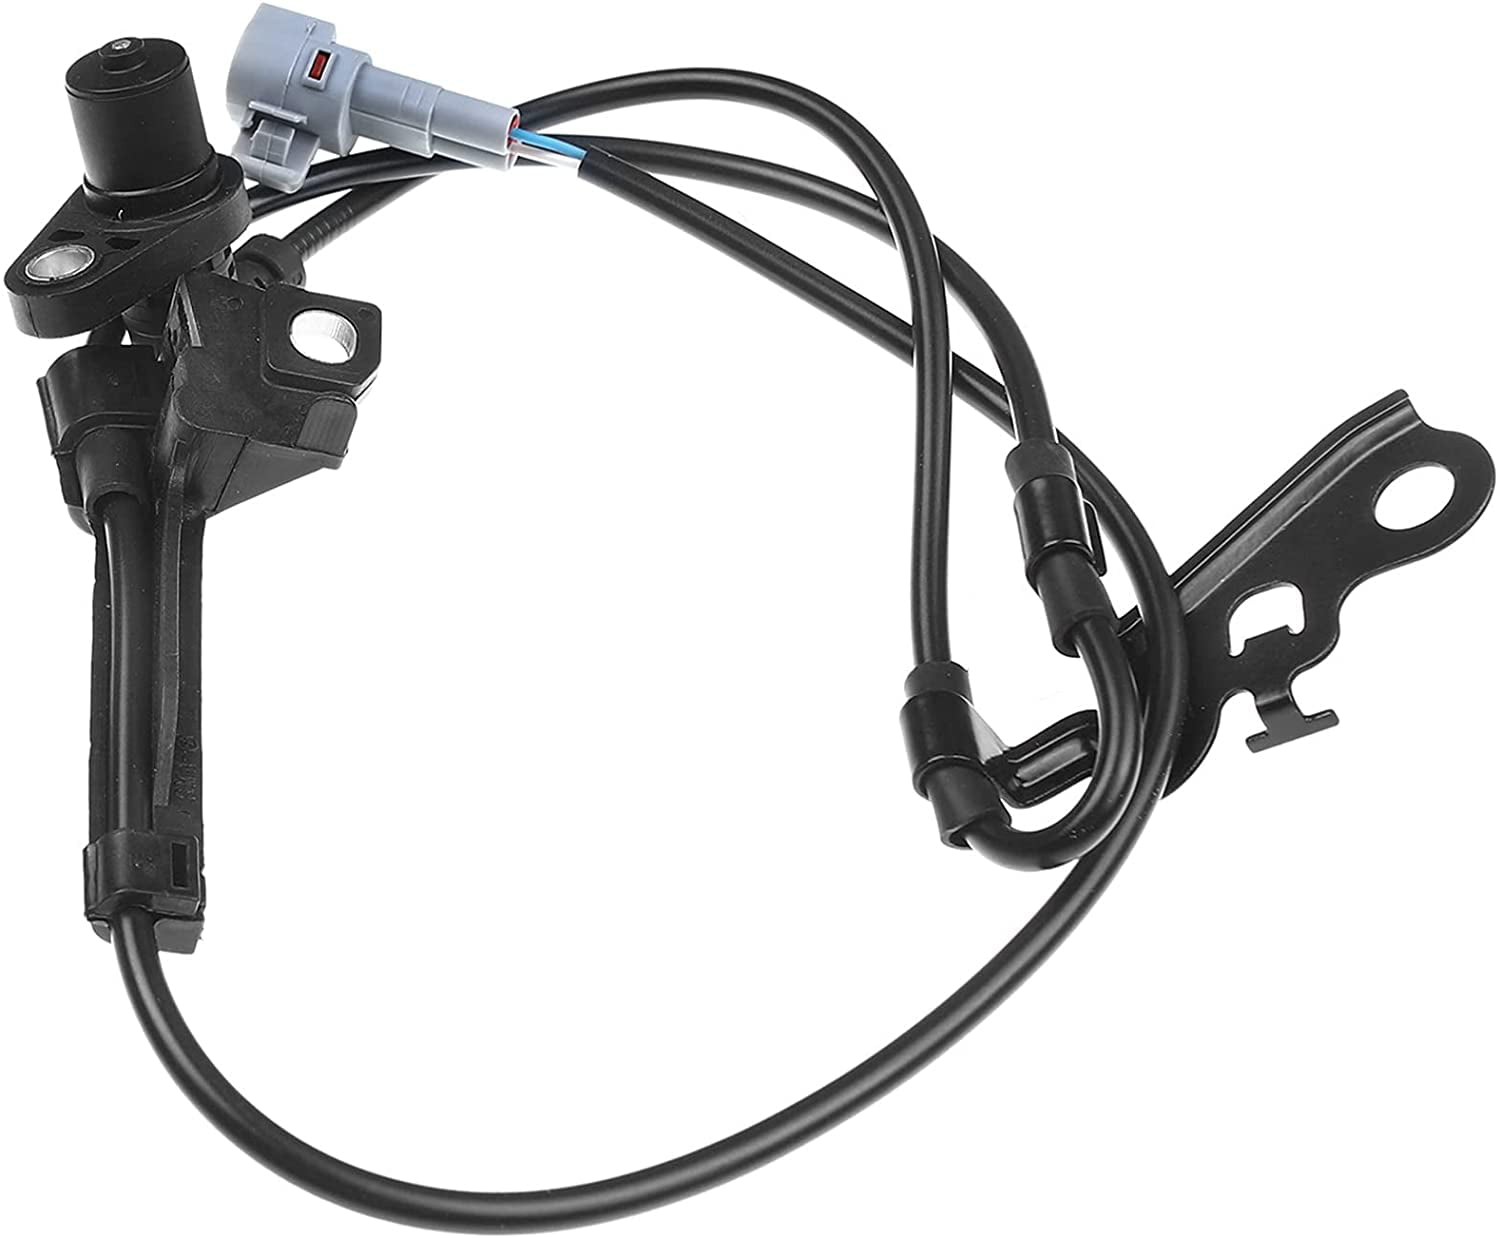 Front Left ABS WHEEL SPEED SENSOR Fits 2003-2008 Corolla Replace ALS1394 5S6831 2ABS0299 AB1646 V70720031 970758 SS20265 8954312070 ALS1394